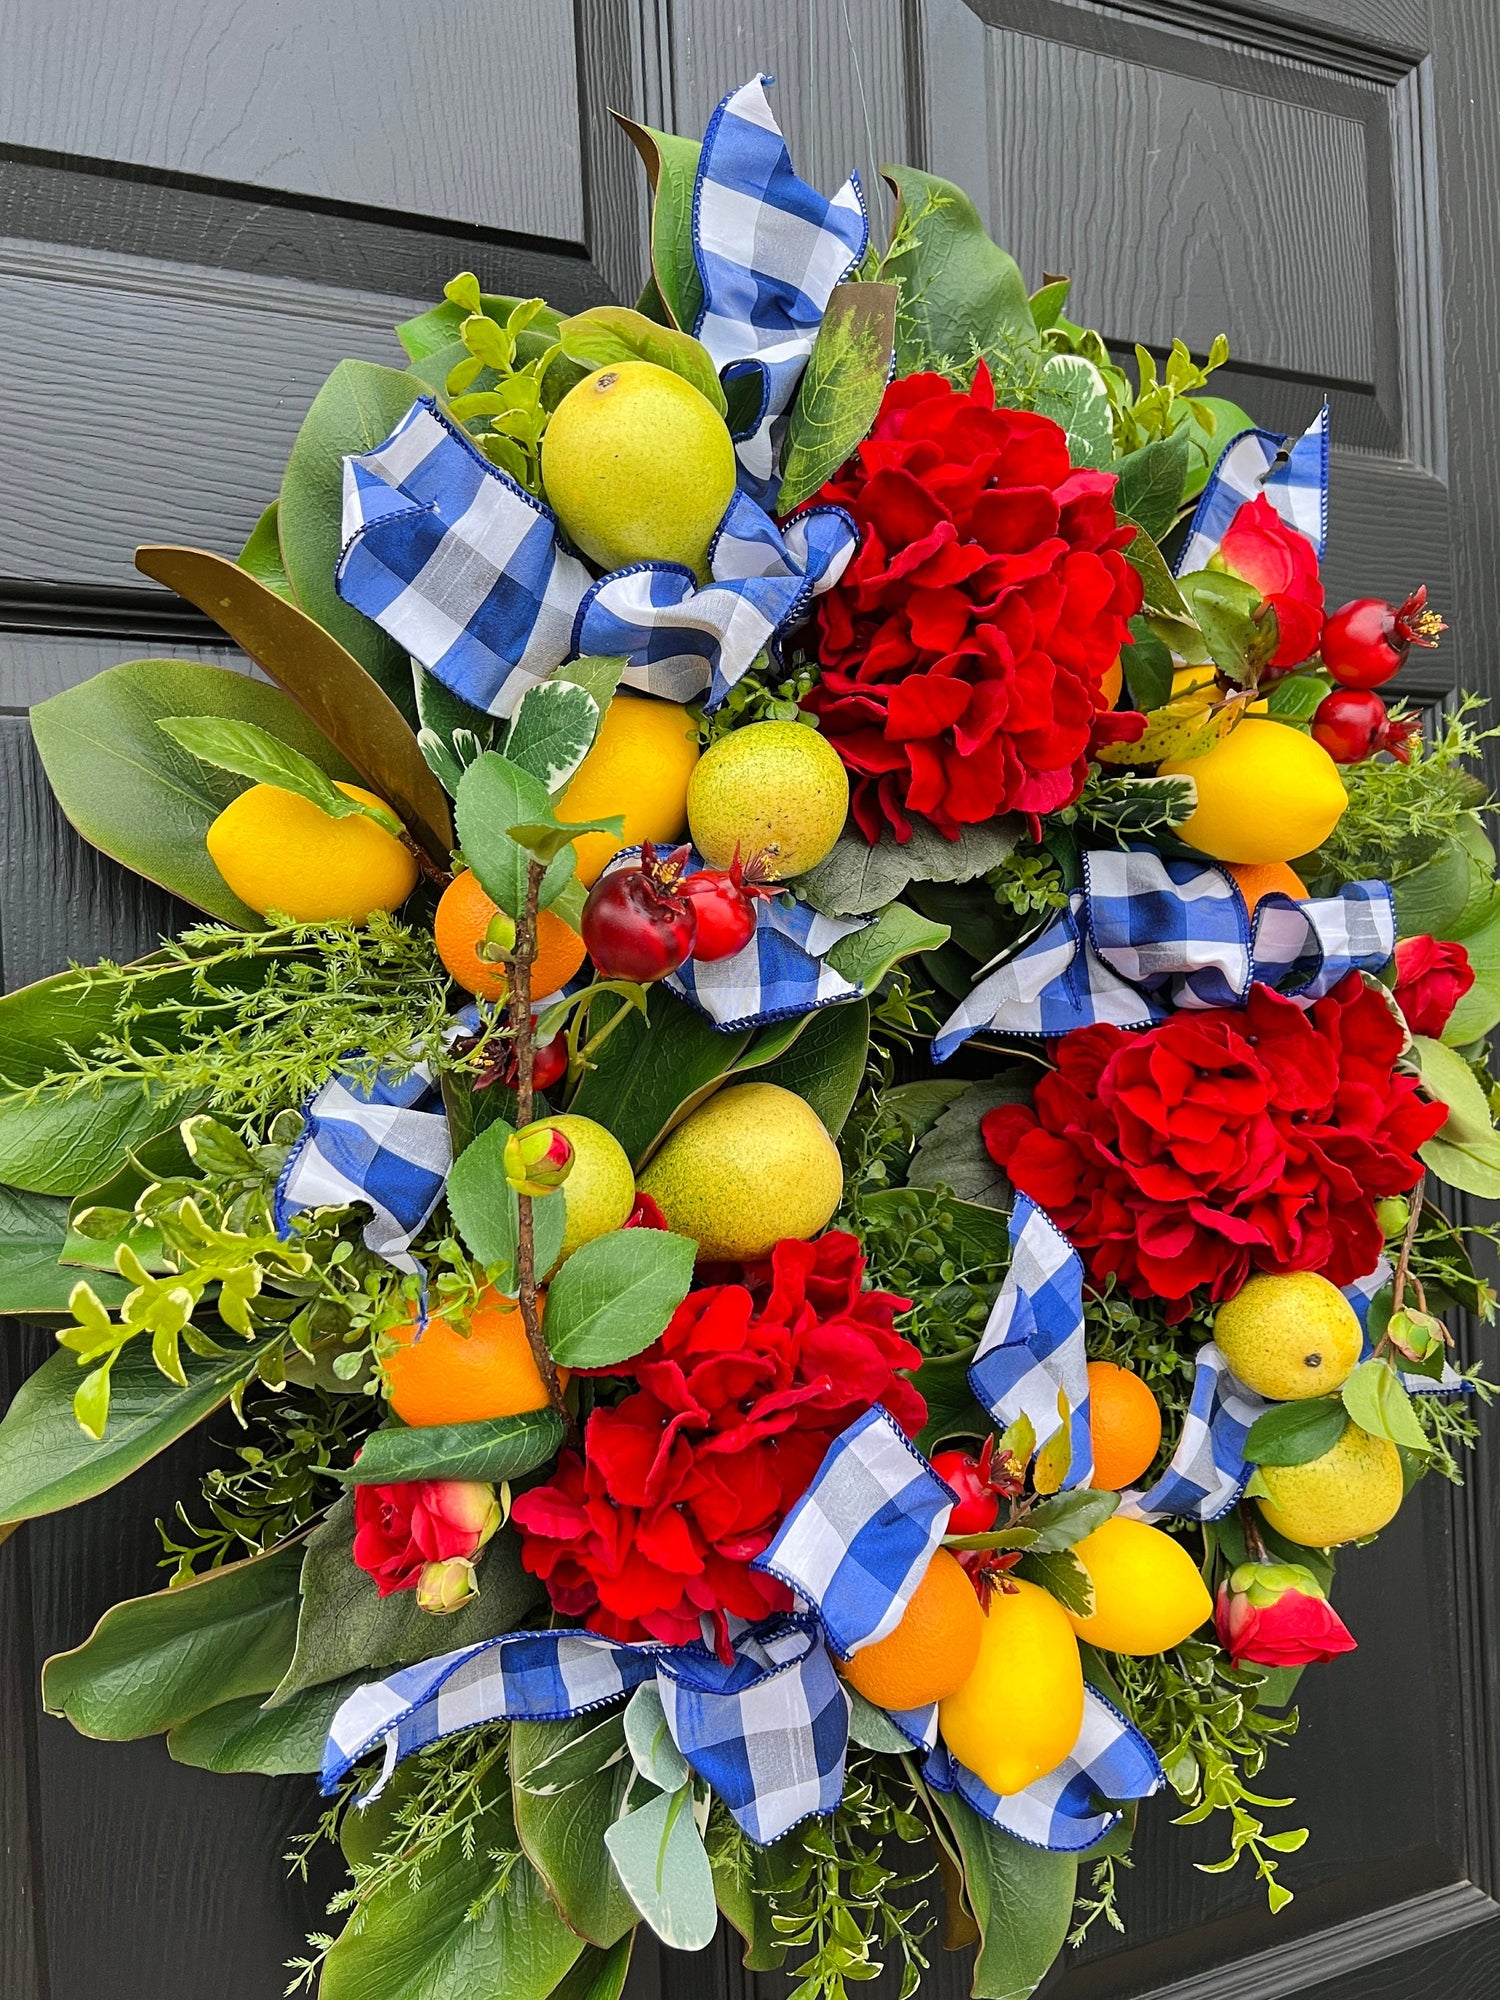 Red hydrangea, fruit, and blue gingham French Country wreath